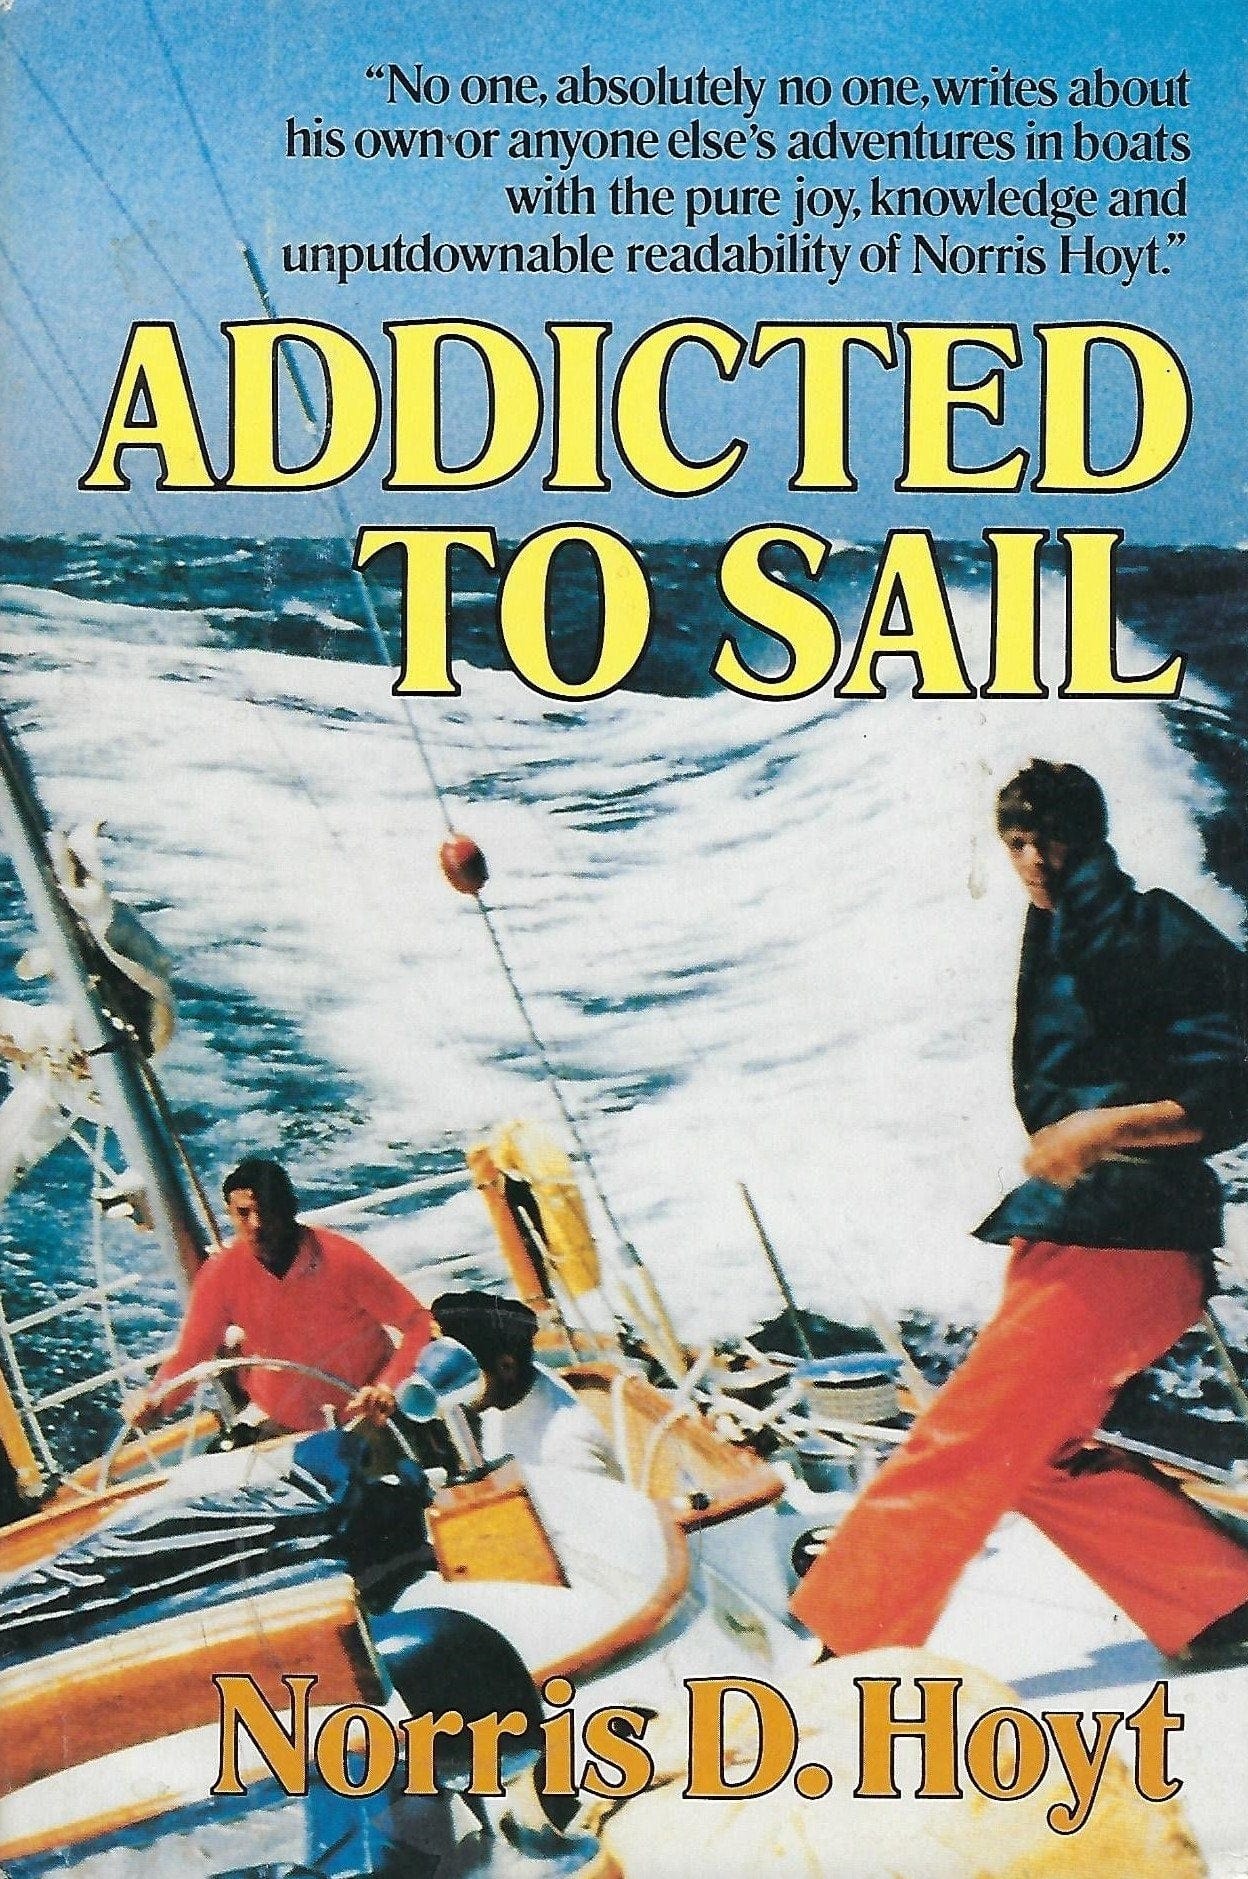 Addicted to Sail